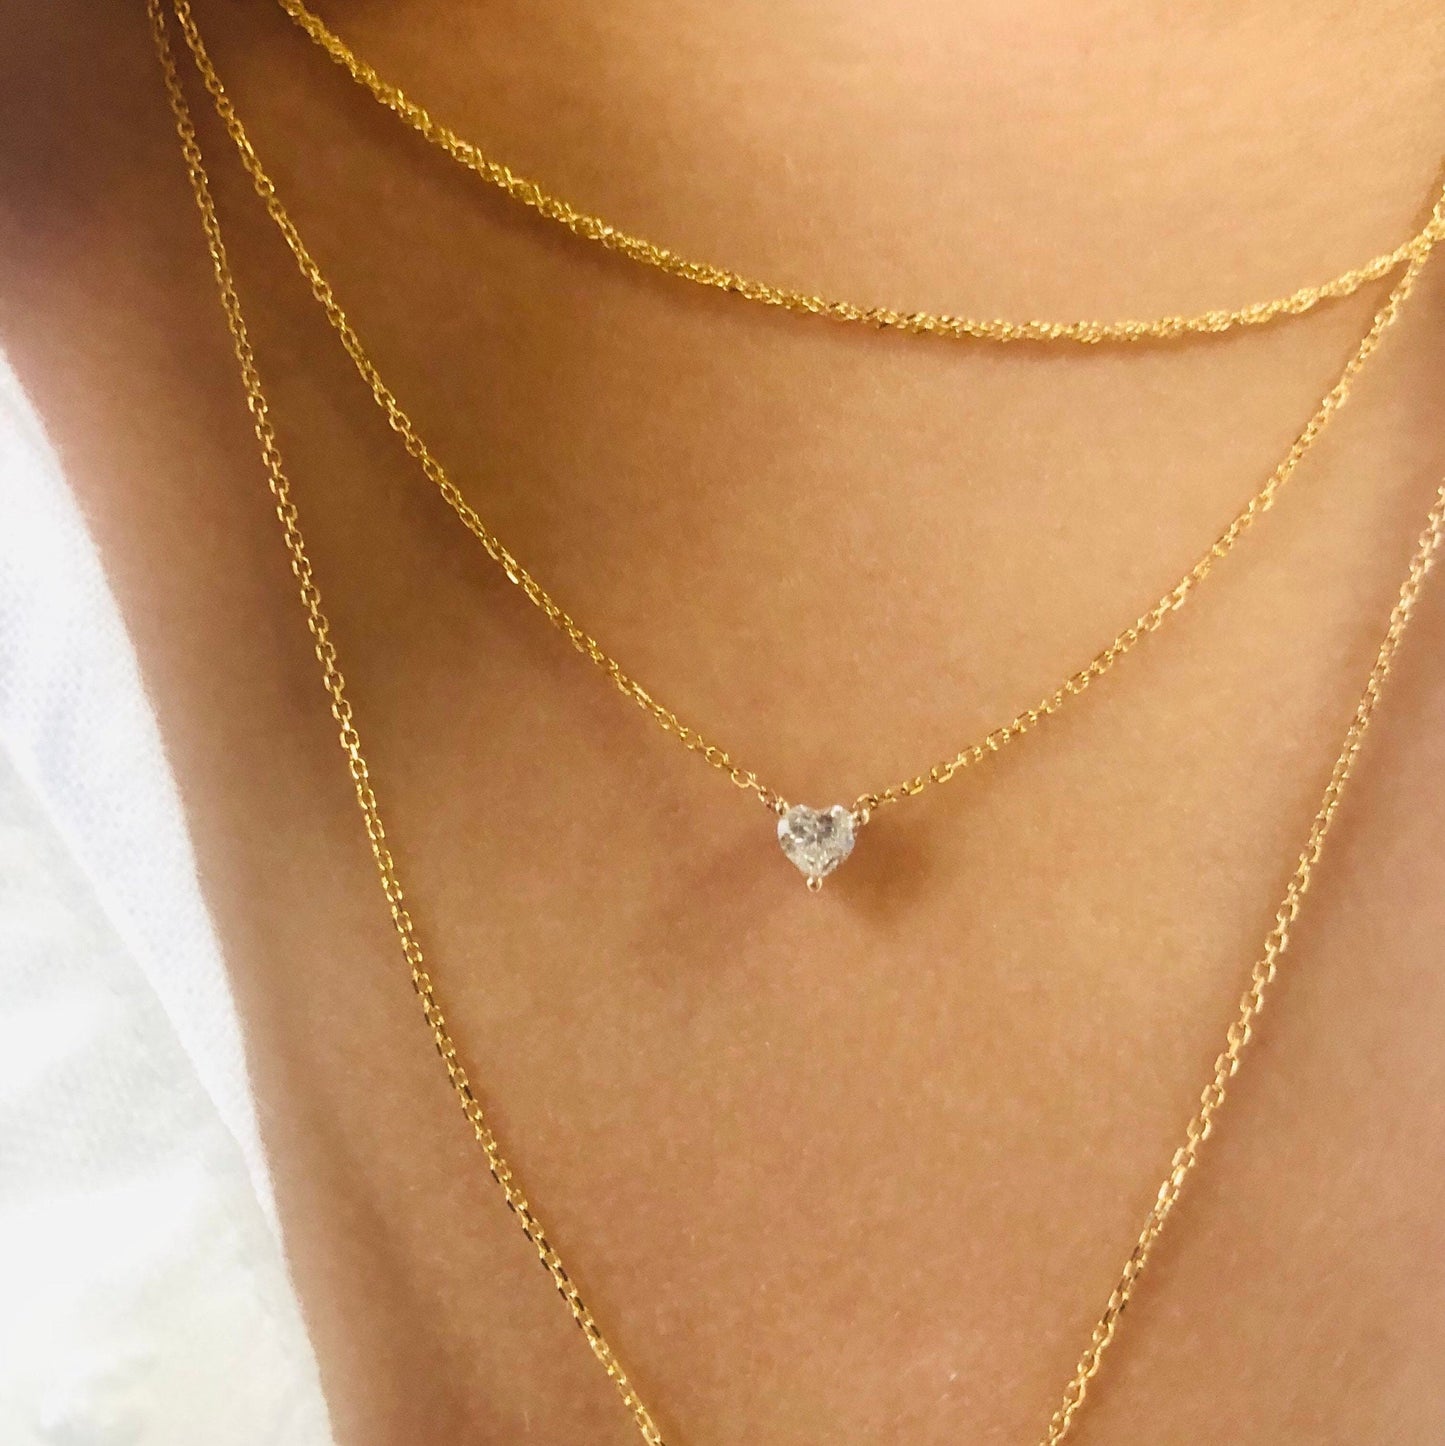 Diamond Solitaire Necklace in 14k Solid Gold, Bridesmaid Gift, Delicate Solitaire Necklace, Floating Diamond, Diamond Layering Necklace